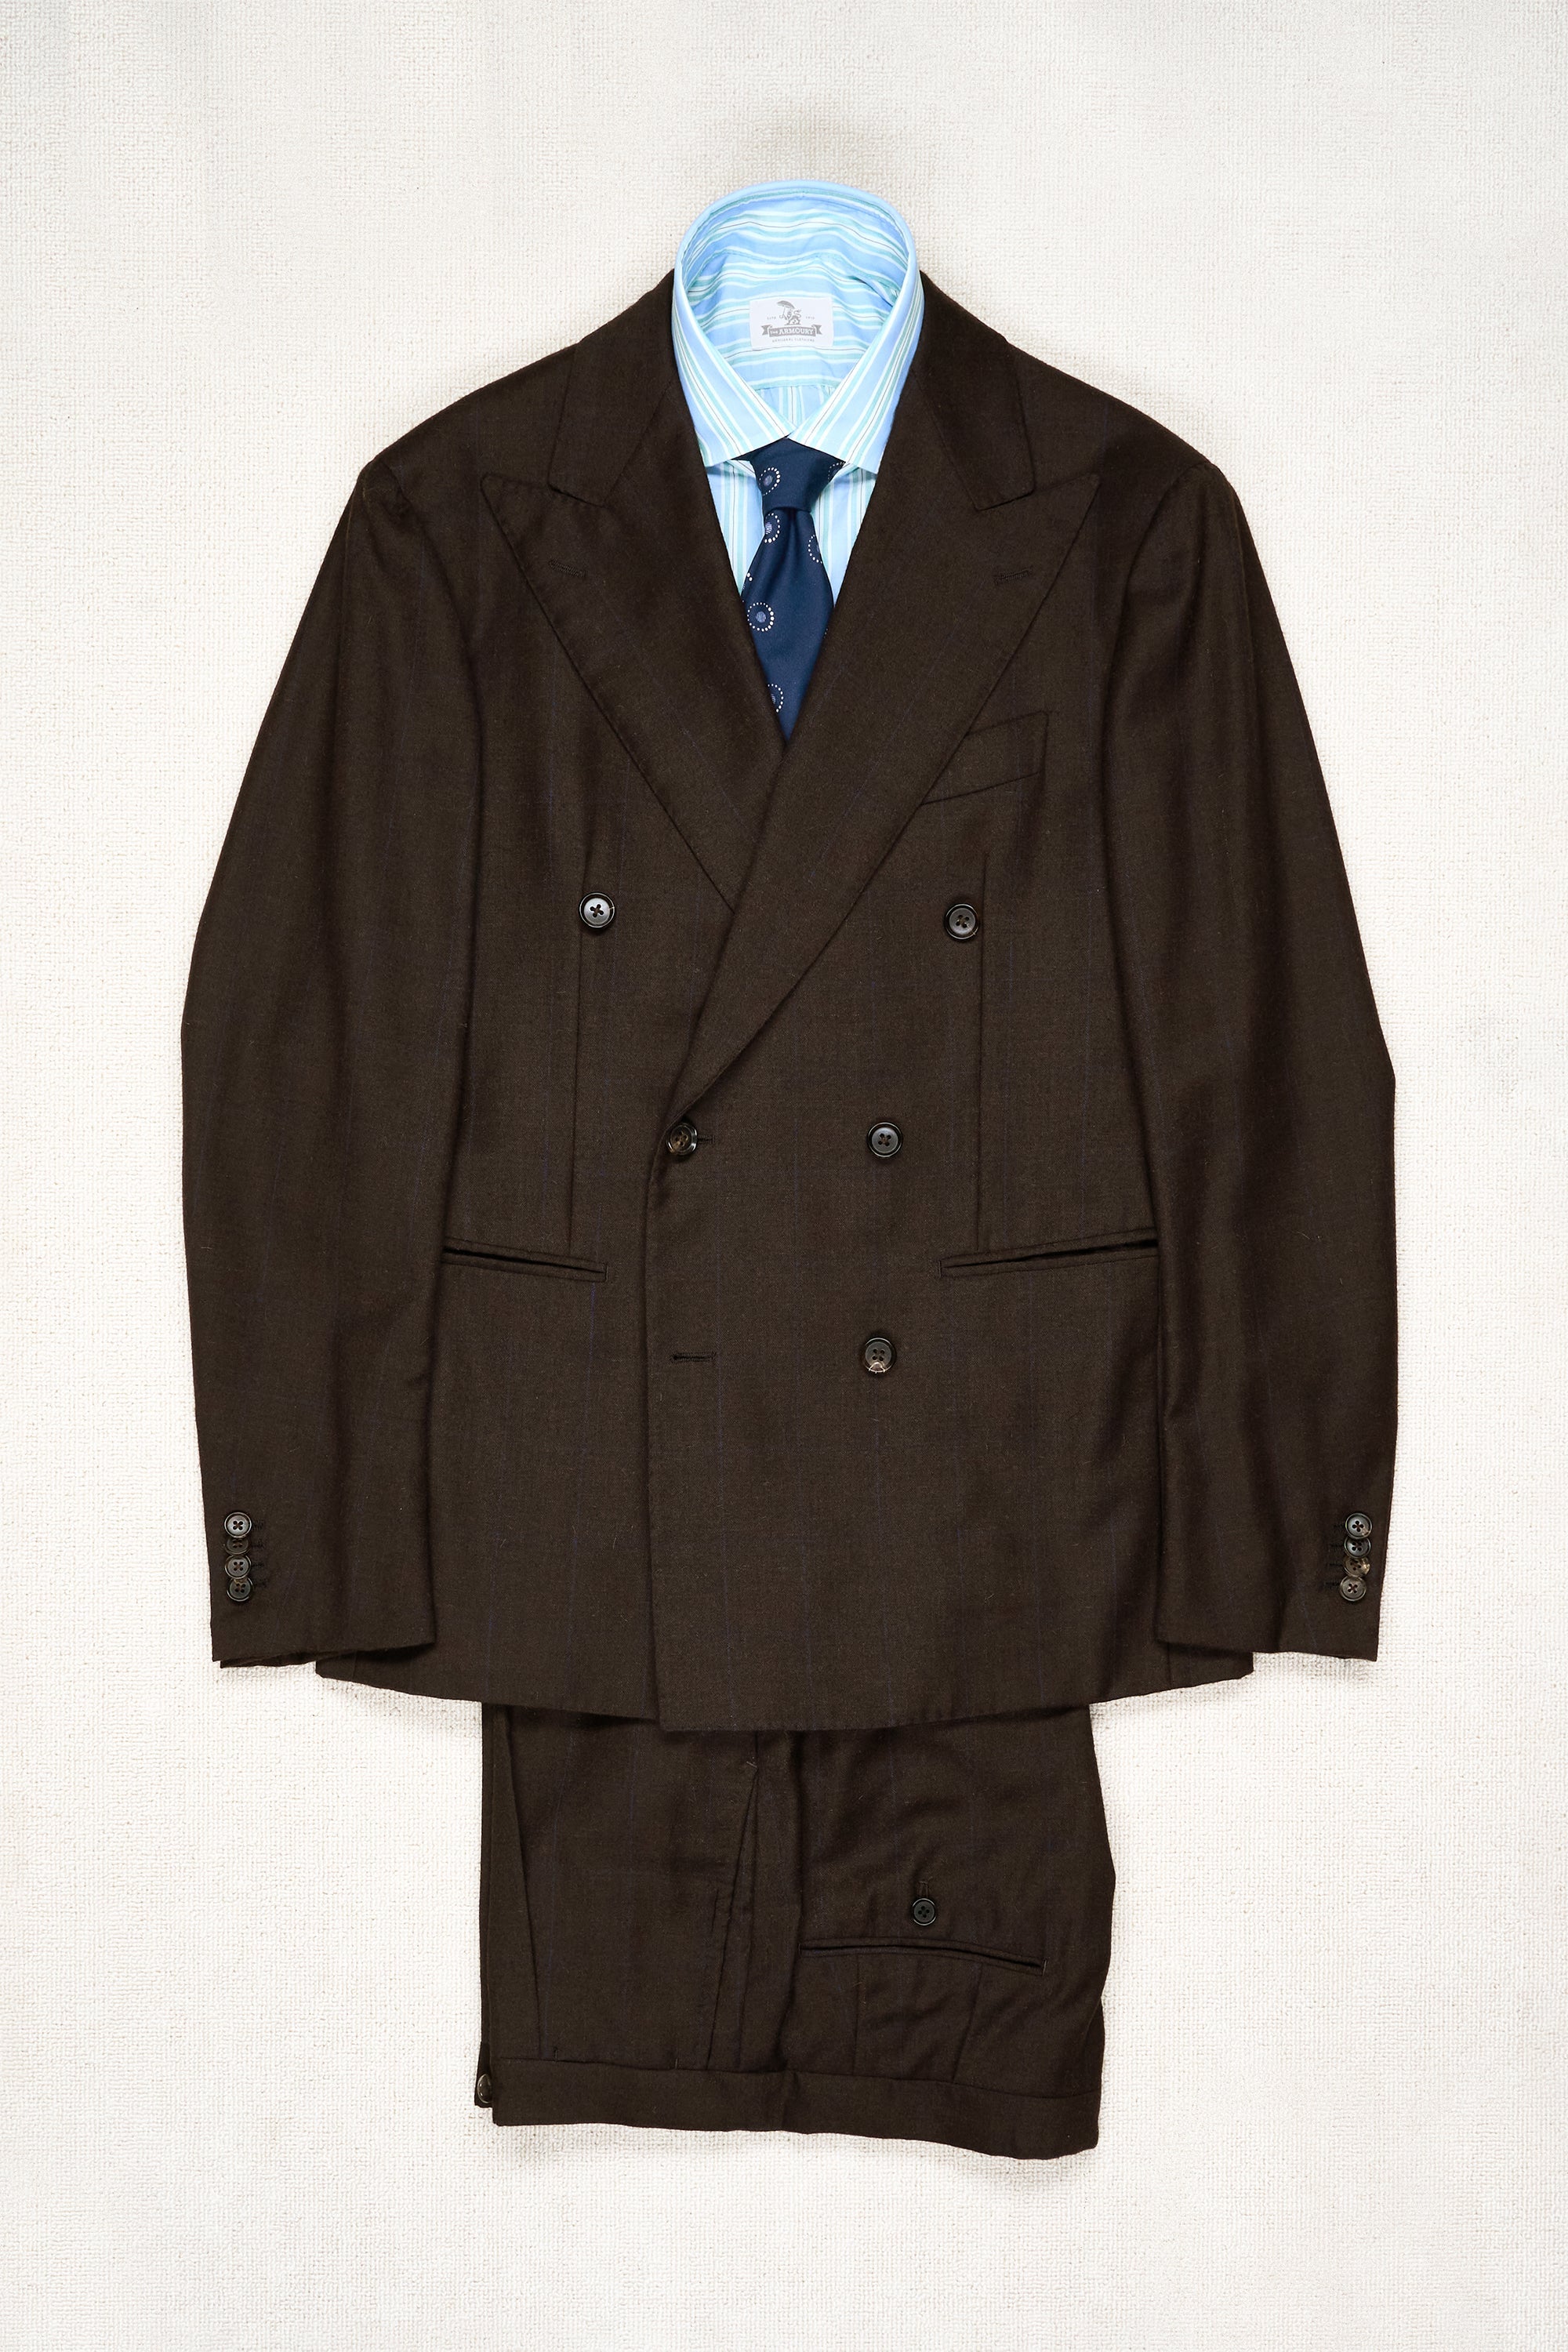 Ring Jacket Meister Brown with Blue Check Wool/Alpaca/Silk/Cashmere DB Suit